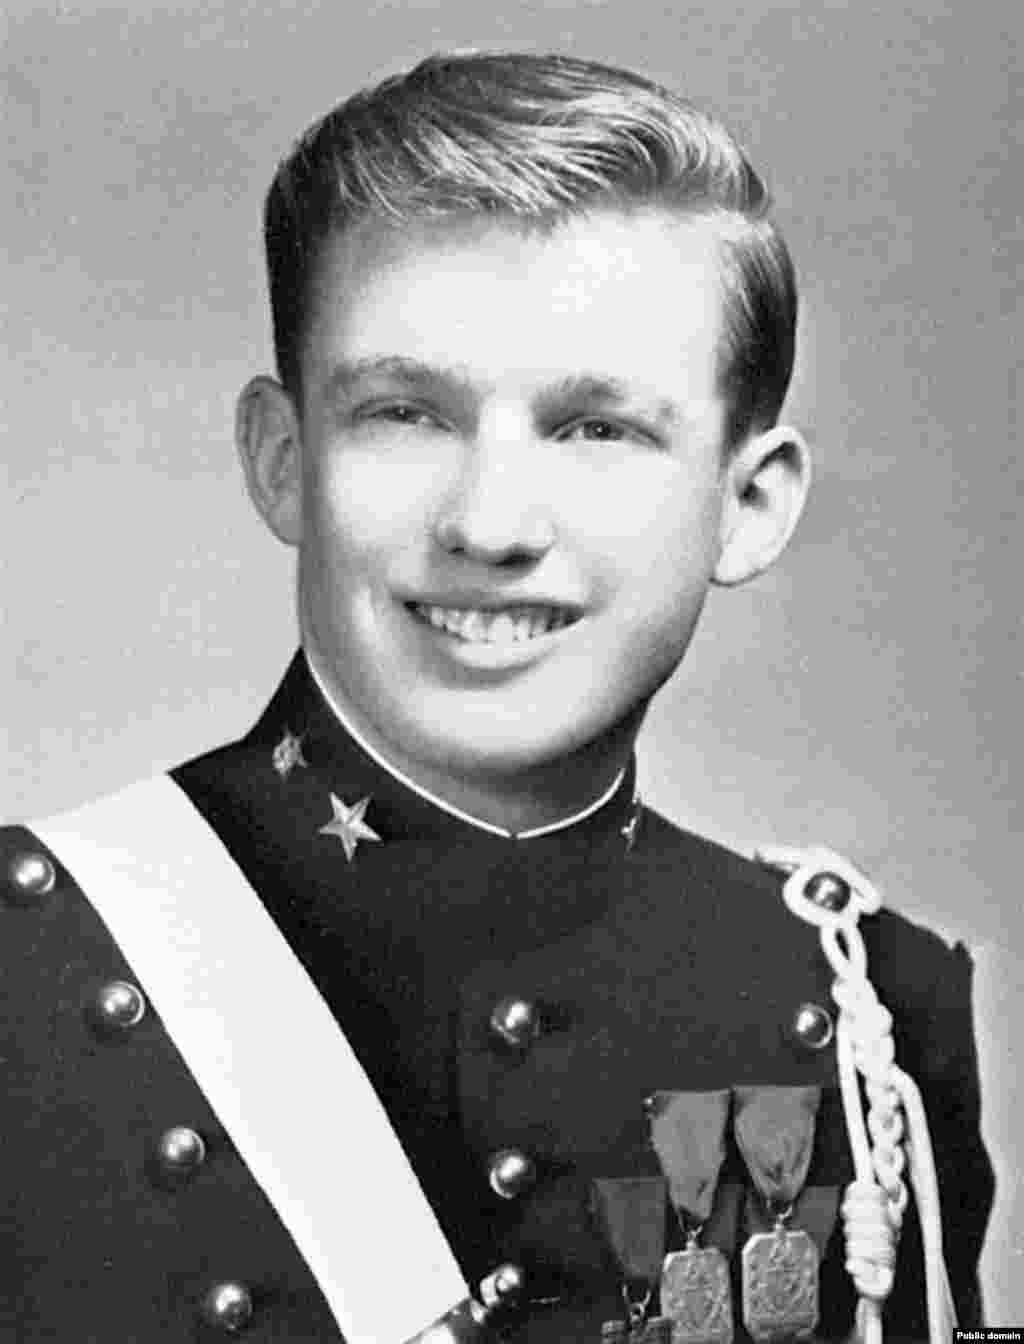 This photo shows Donald Trump as a teenager at the New York Military Academy in 1964. (Public domain)